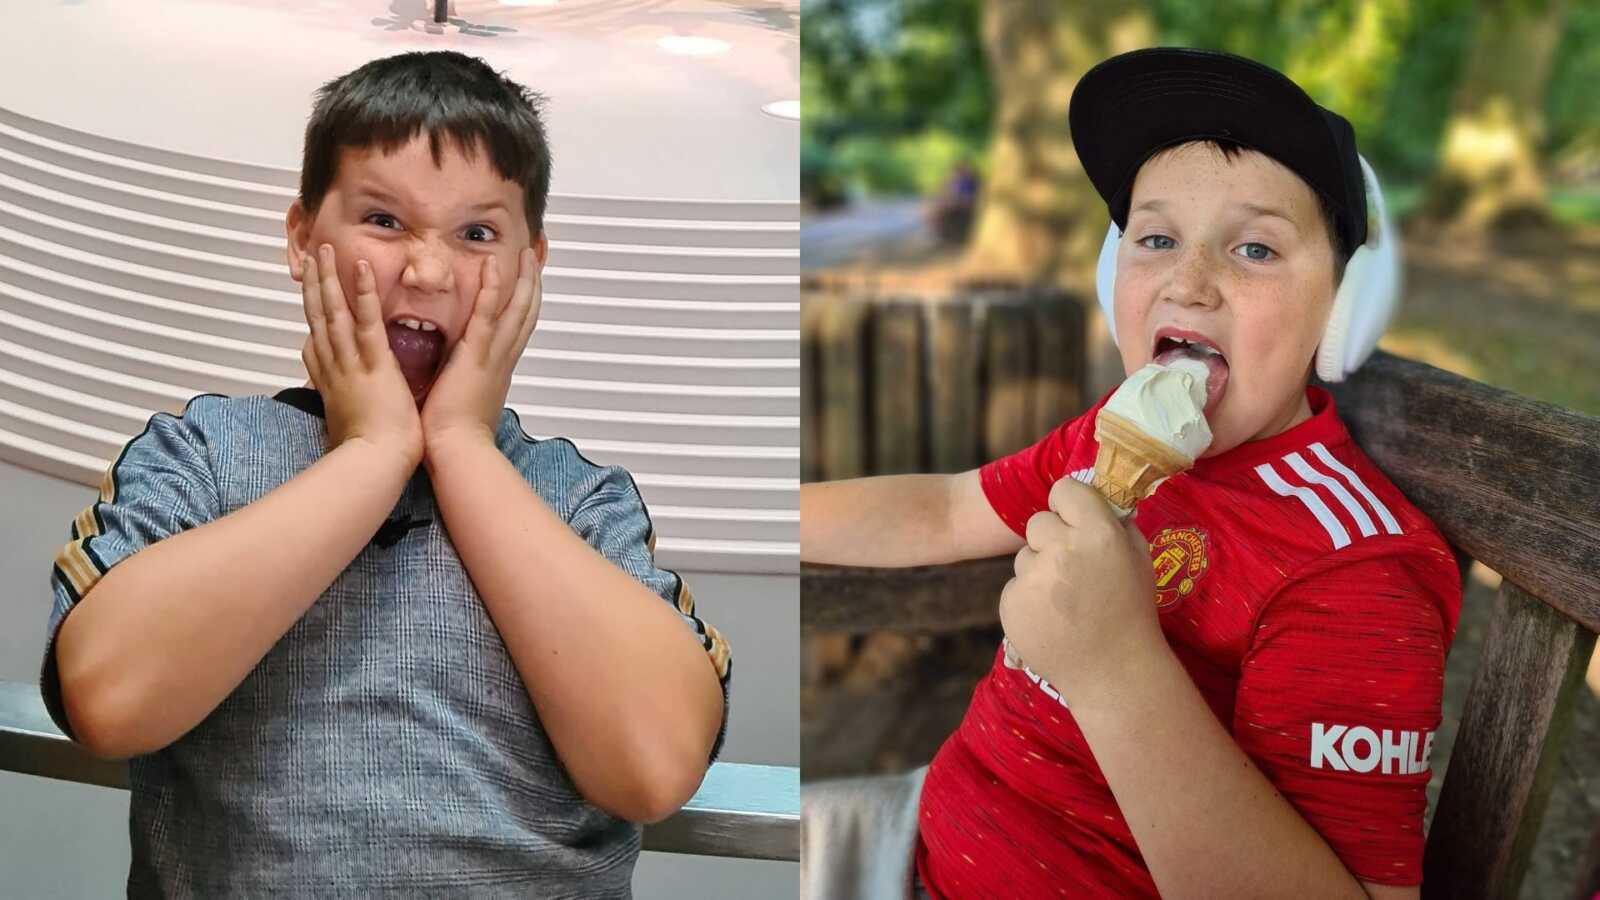 An autistic boy with his hands on his face and a boy eating ice cream